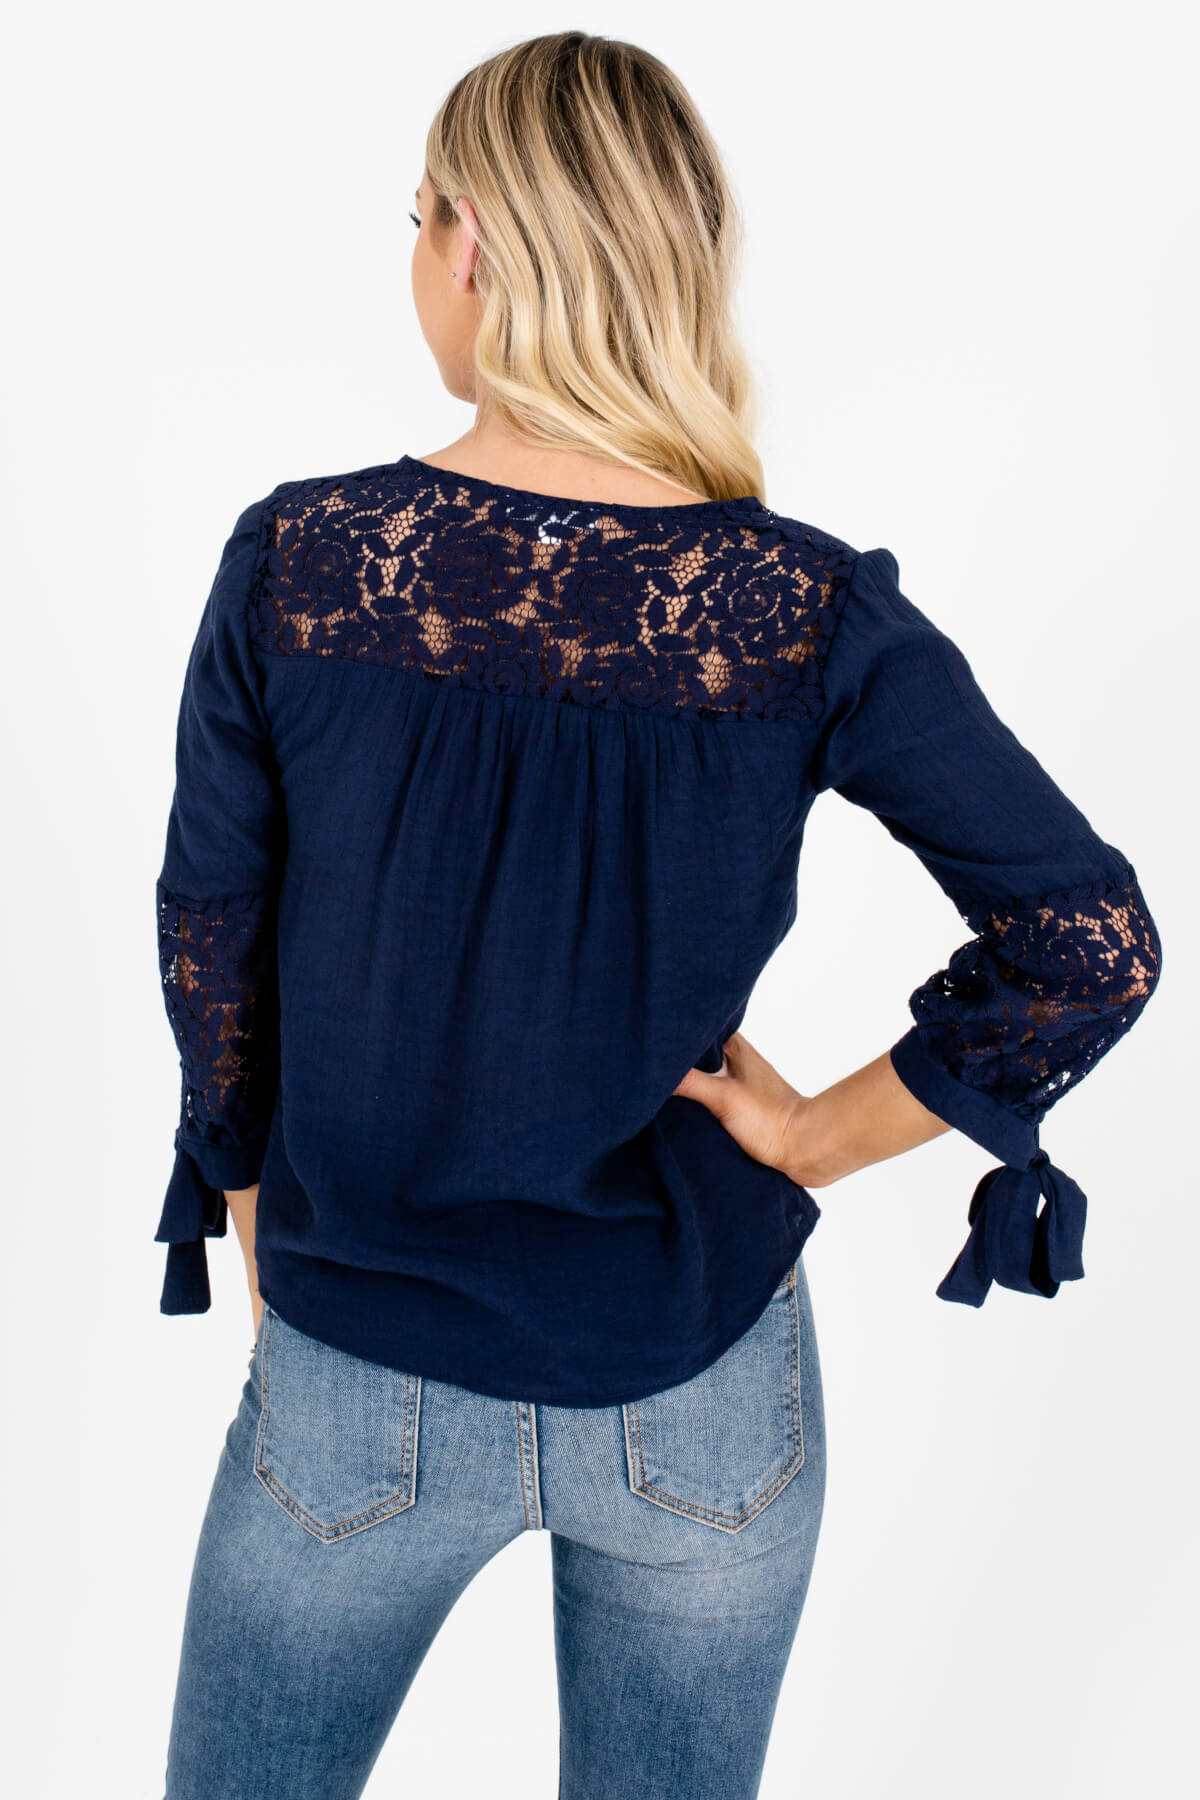 Navy Blue Floral Crochet Lace Accent 3/4 Sleeve Tops for Women